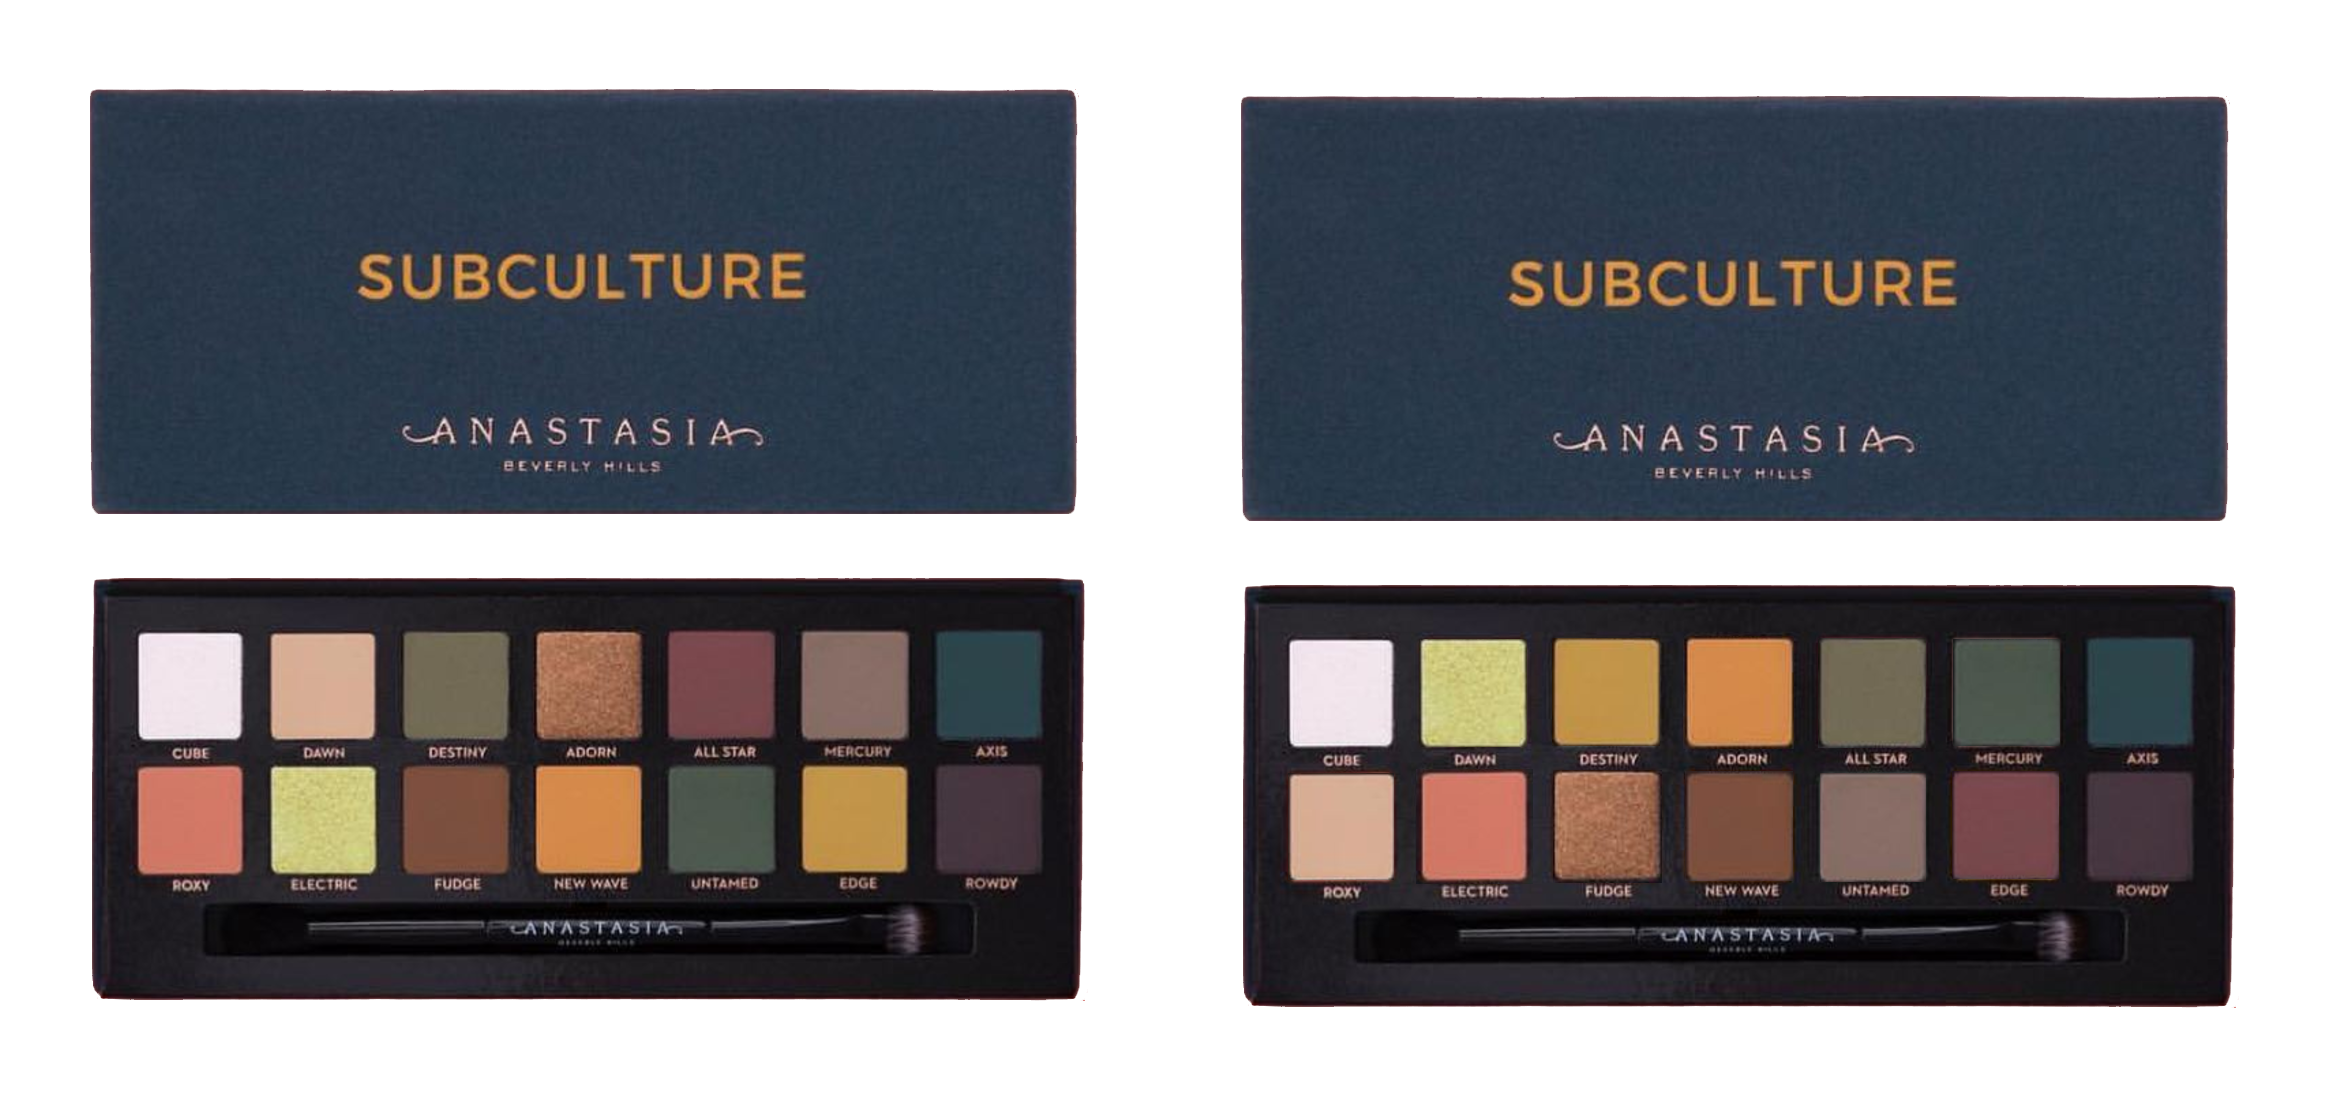 When I first saw this palette